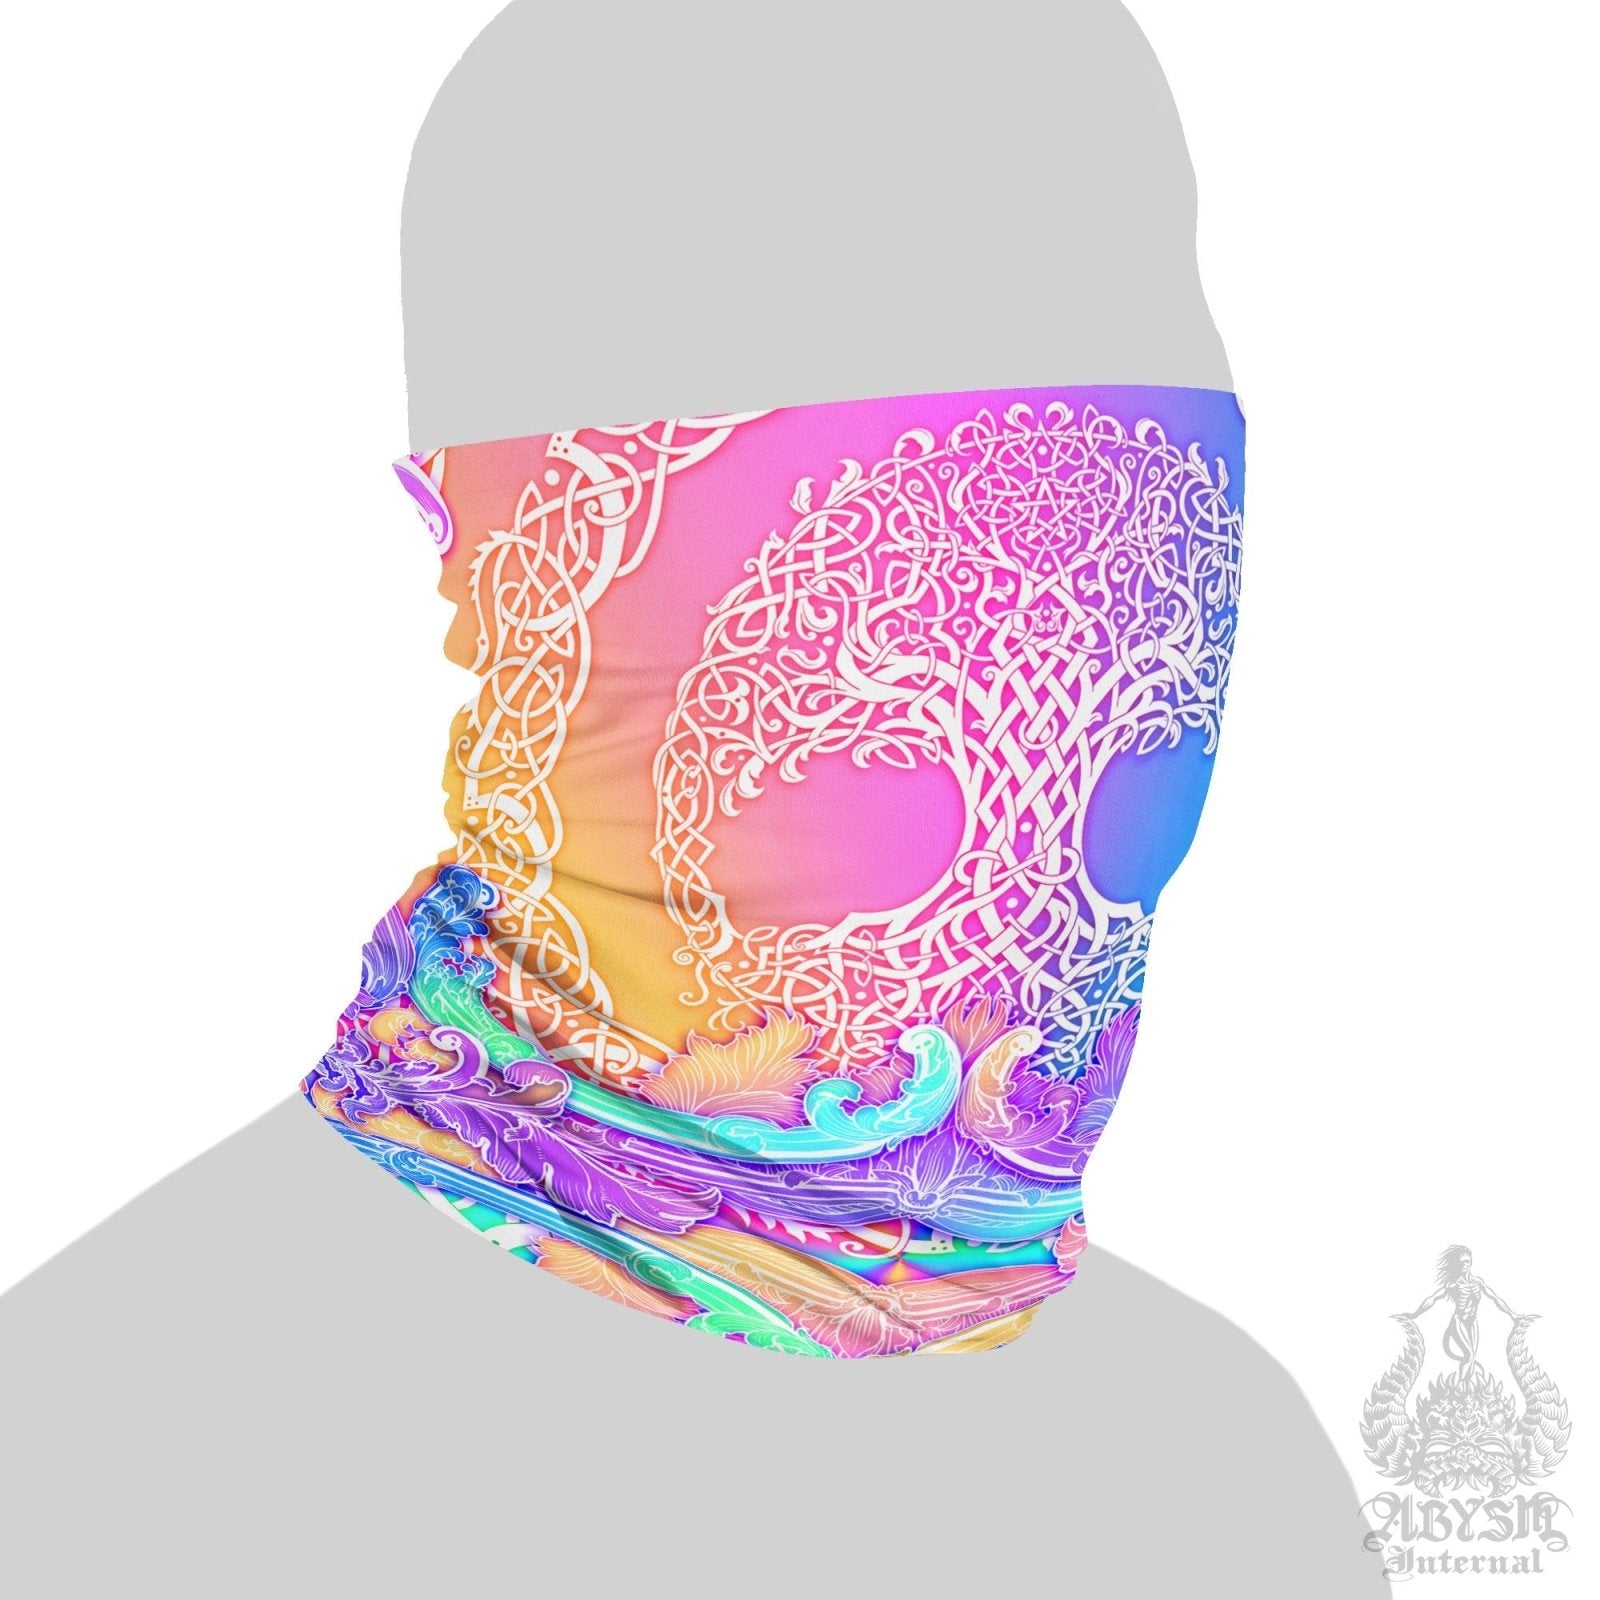 Celtic Neck Gaiter, Face Mask, Head Covering, Rave Outfit, Pagan Outfit, Tree of Life, Witchy - Aesthetic, Holographic Pastel - Abysm Internal